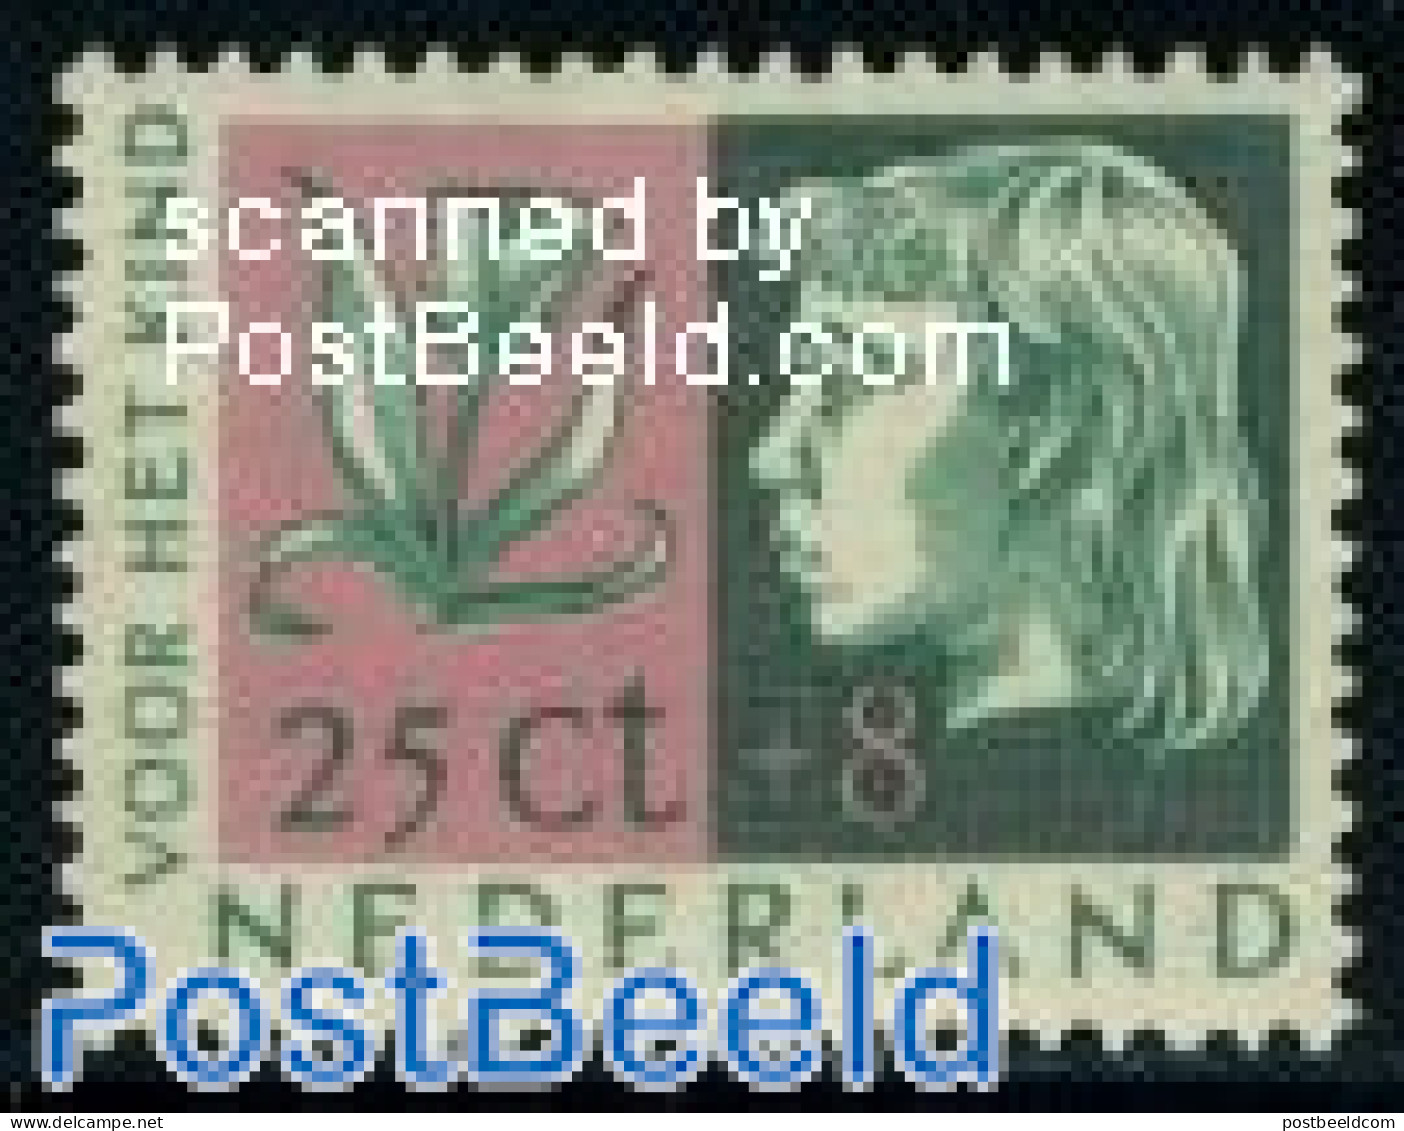 Netherlands 1953 25+8c, Stamp Out Of Set, Mint NH, Nature - Flowers & Plants - Neufs